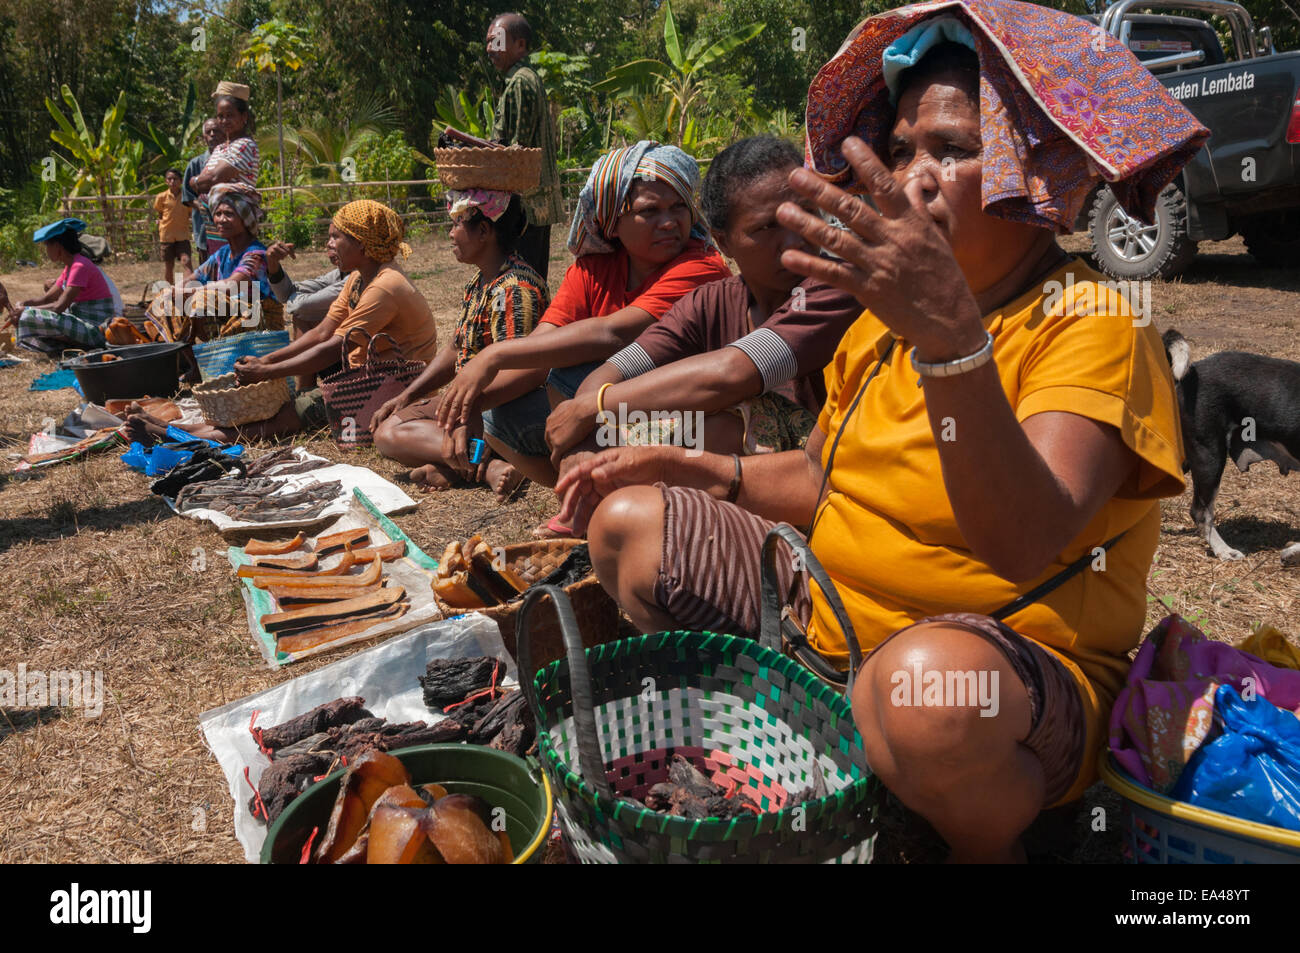 Women from Lamalera whaling village taking part at a barter market  in Lembata Island, Indonesia. Stock Photo